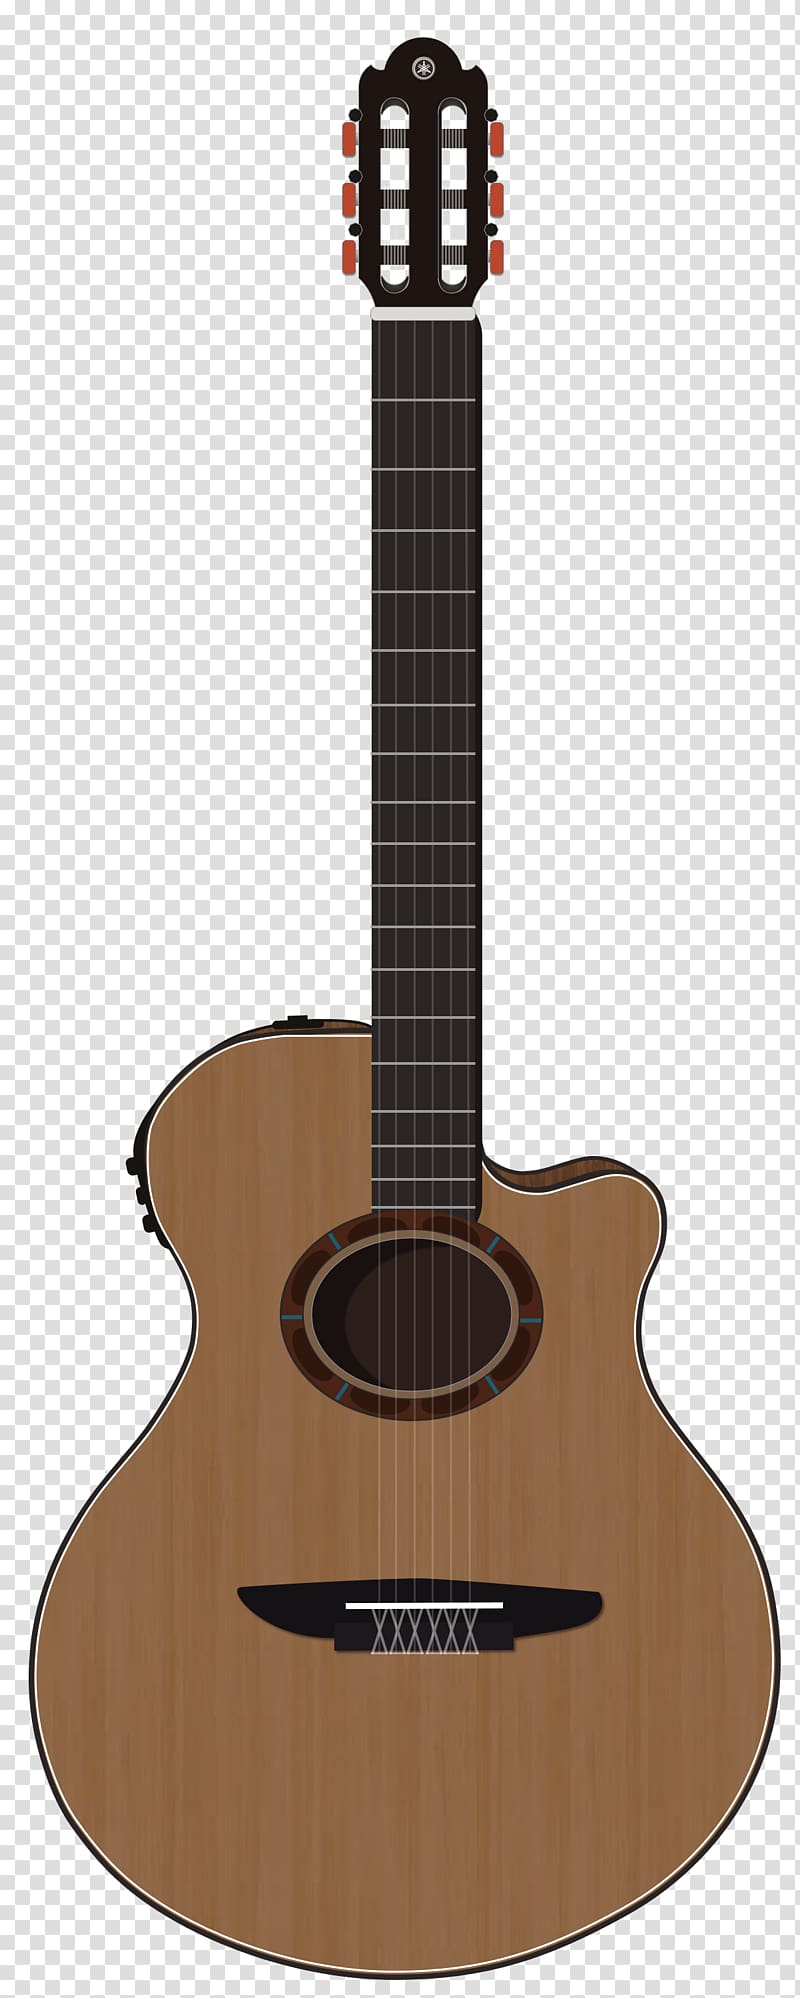 Acoustic guitar Classical guitar Acoustic-electric guitar Archtop guitar, Acoustic Guitar transparent background PNG clipart